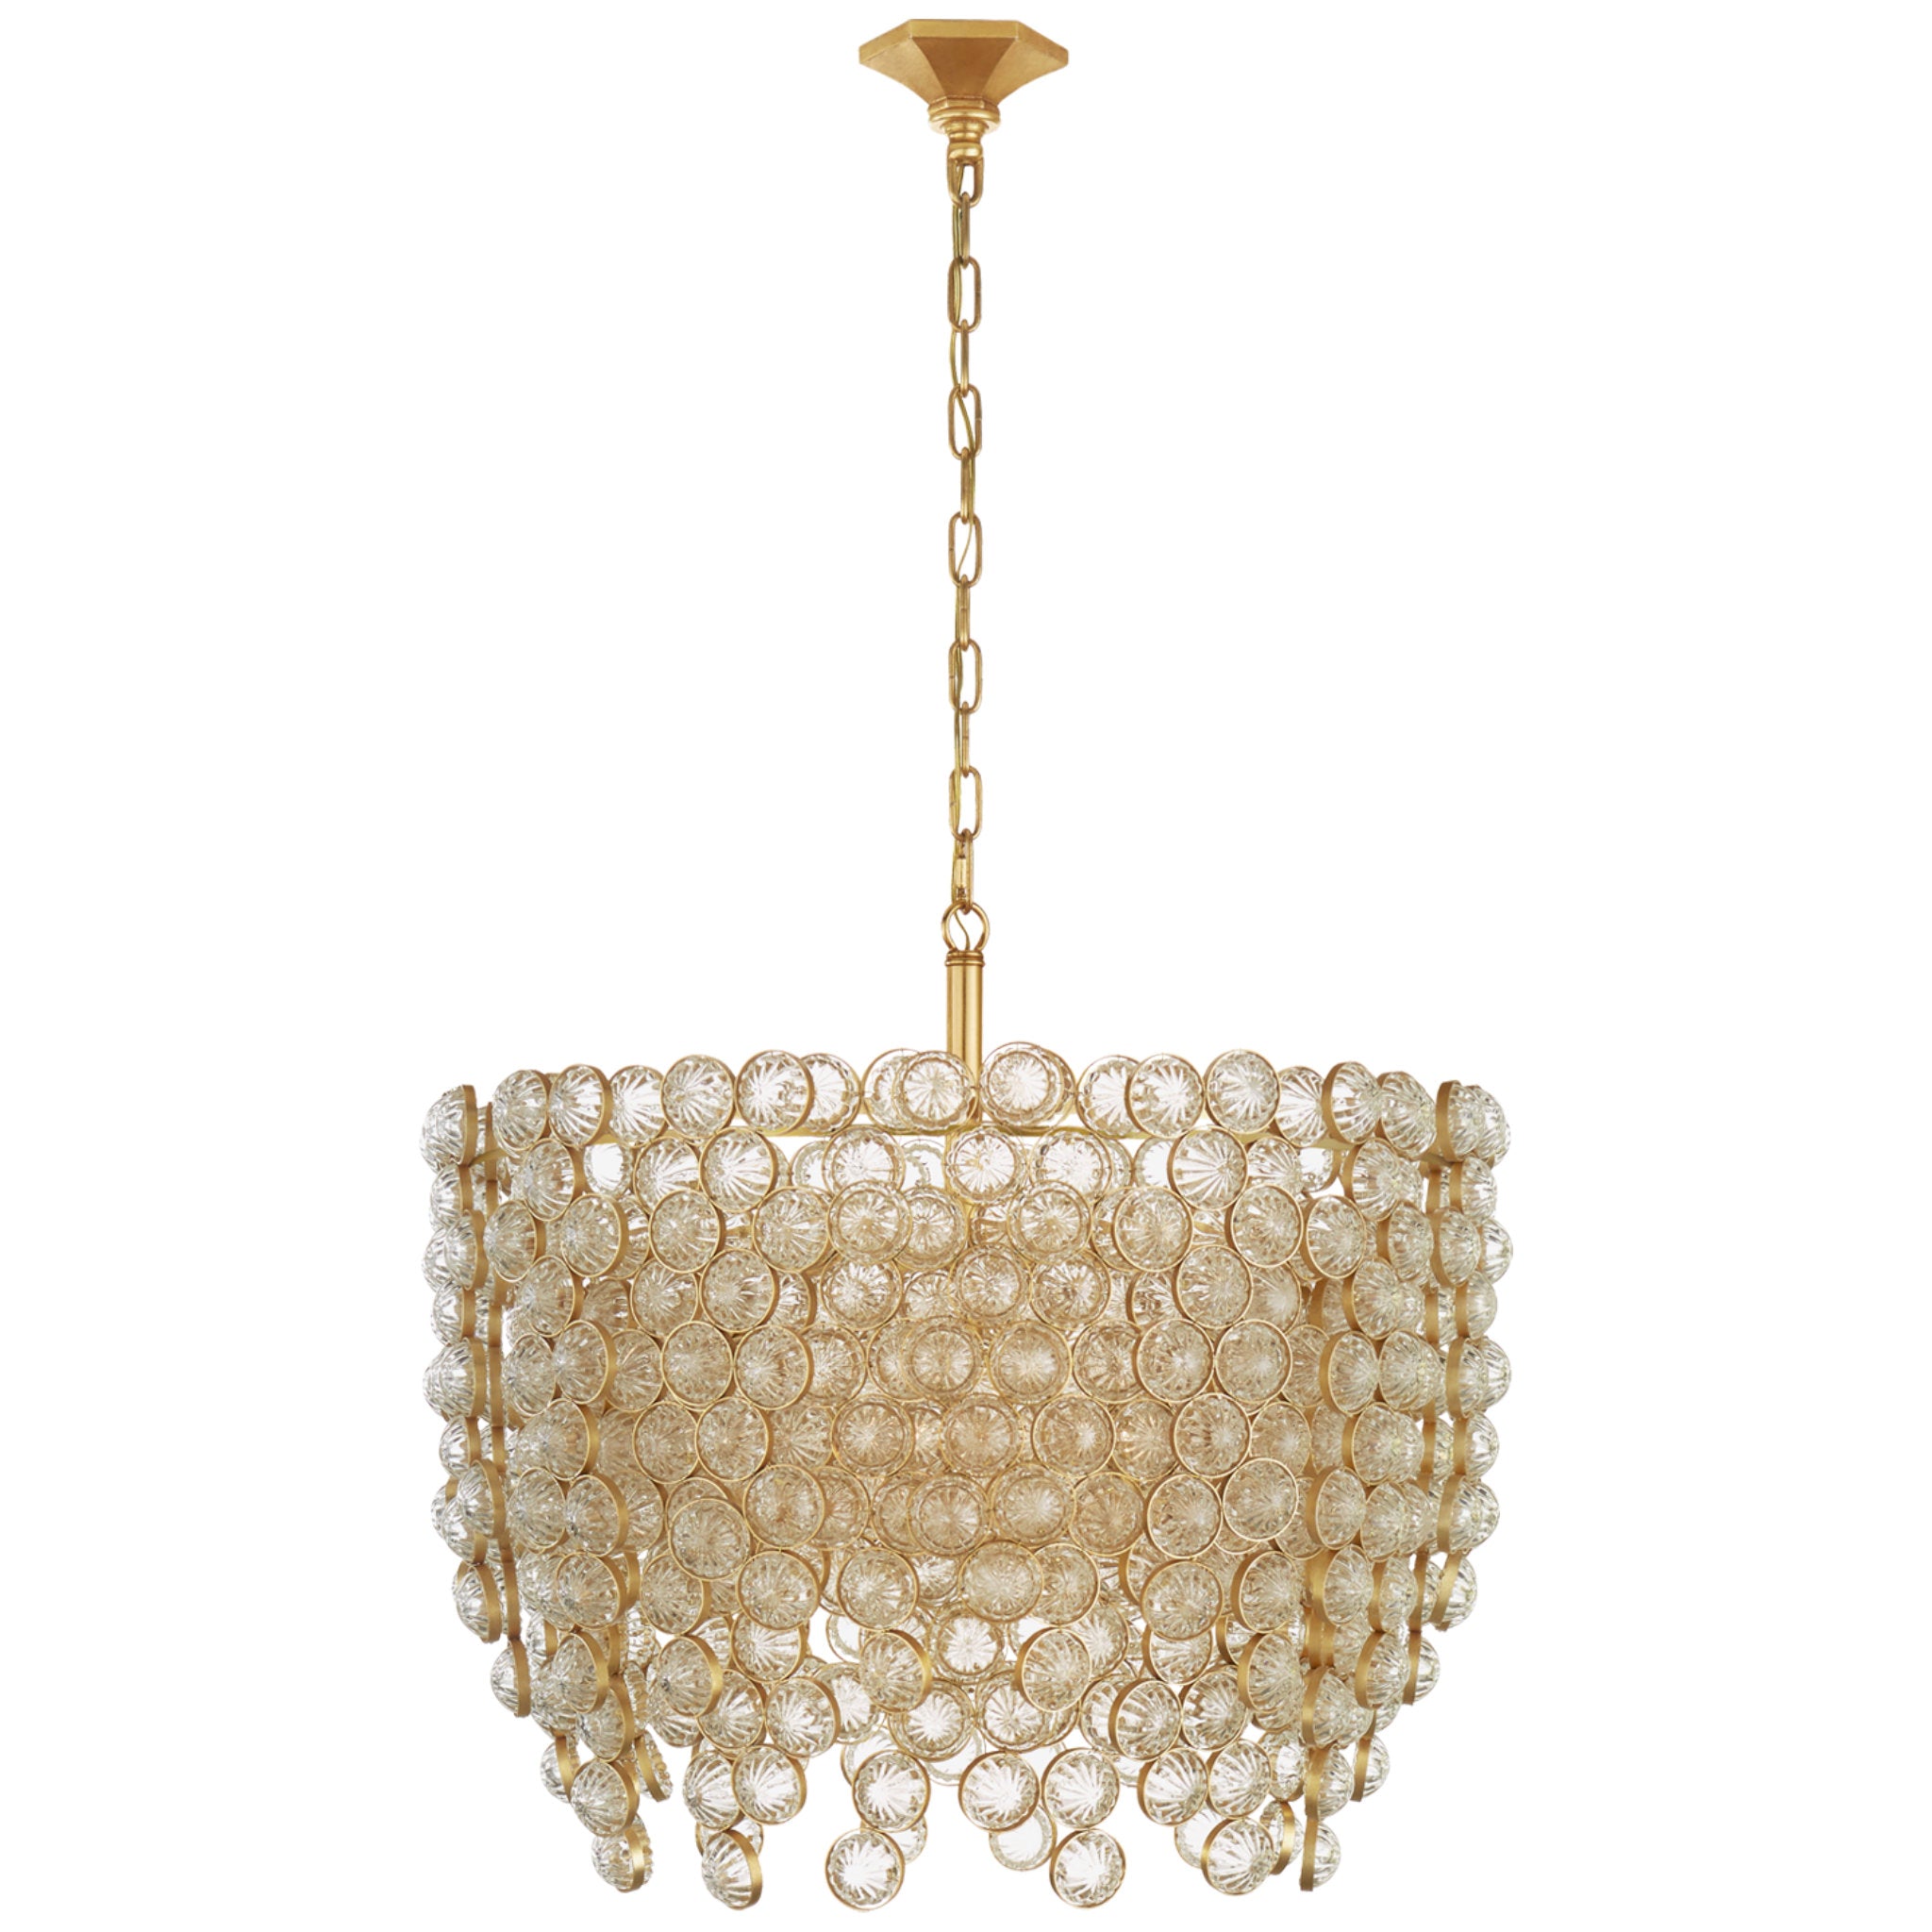 Julie Neill Milazzo Medium Waterfall Chandelier in Gild and Crystal